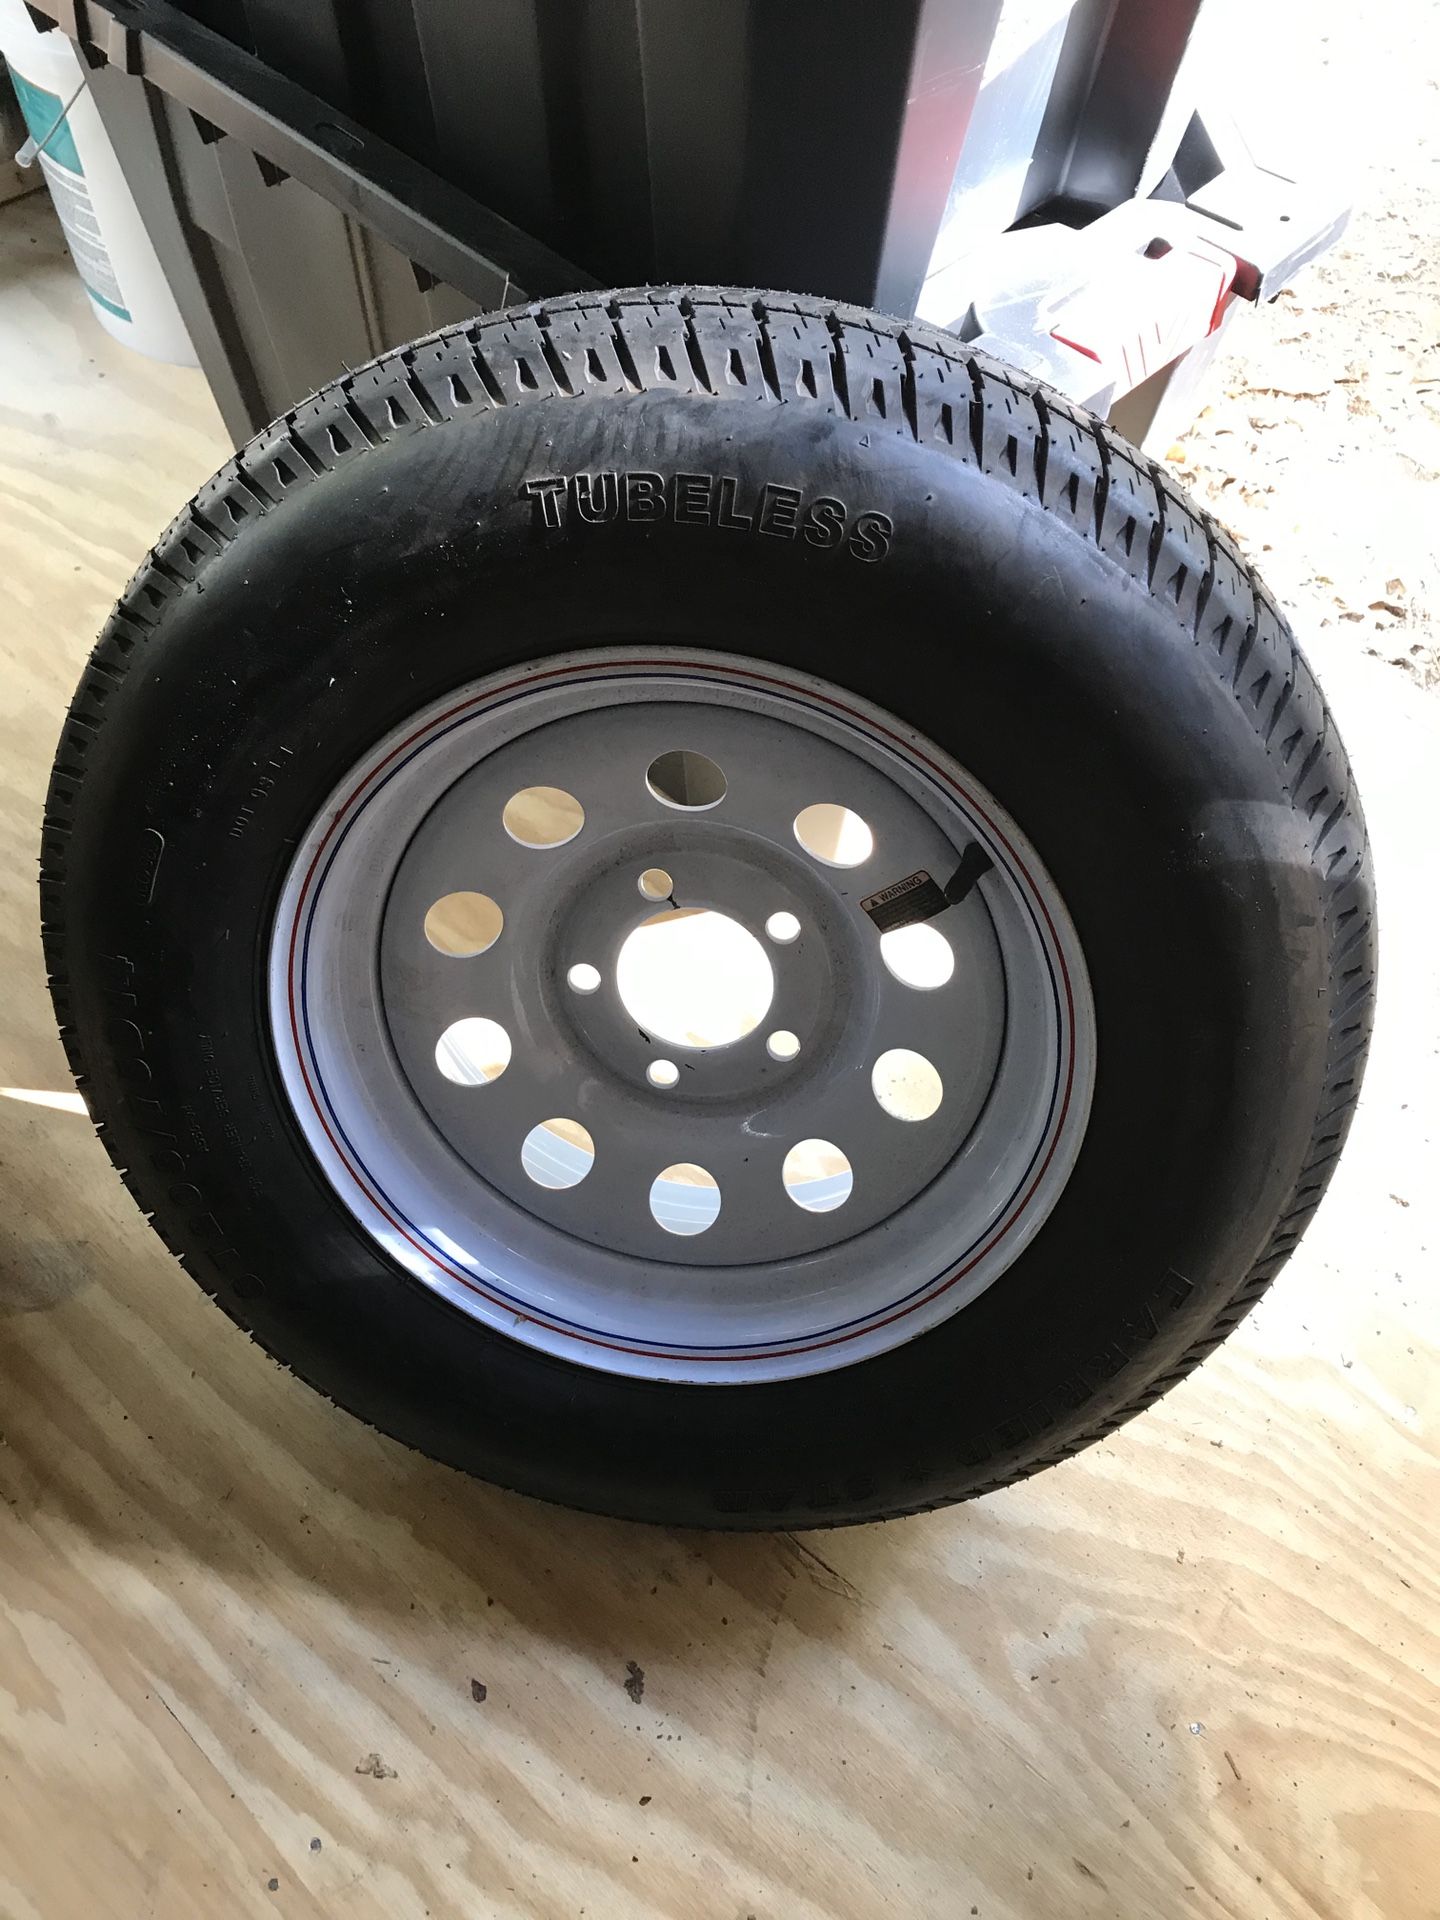 Brand new 14” trailer wheel and tire